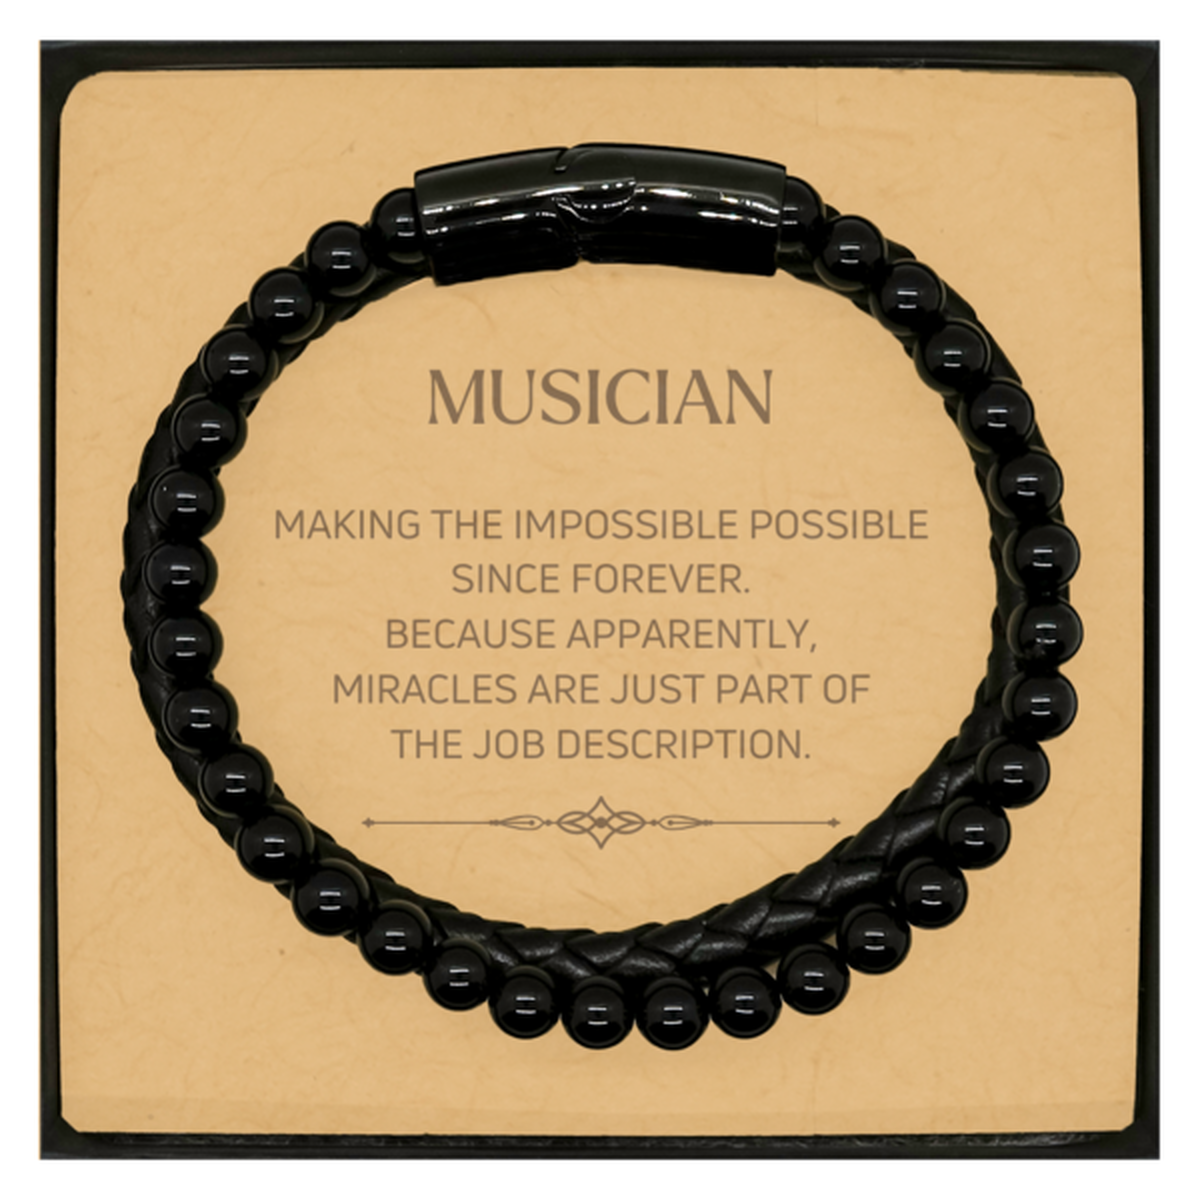 Funny Musician Gifts, Miracles are just part of the job description, Inspirational Birthday Christmas Stone Leather Bracelets For Musician, Men, Women, Coworkers, Friends, Boss